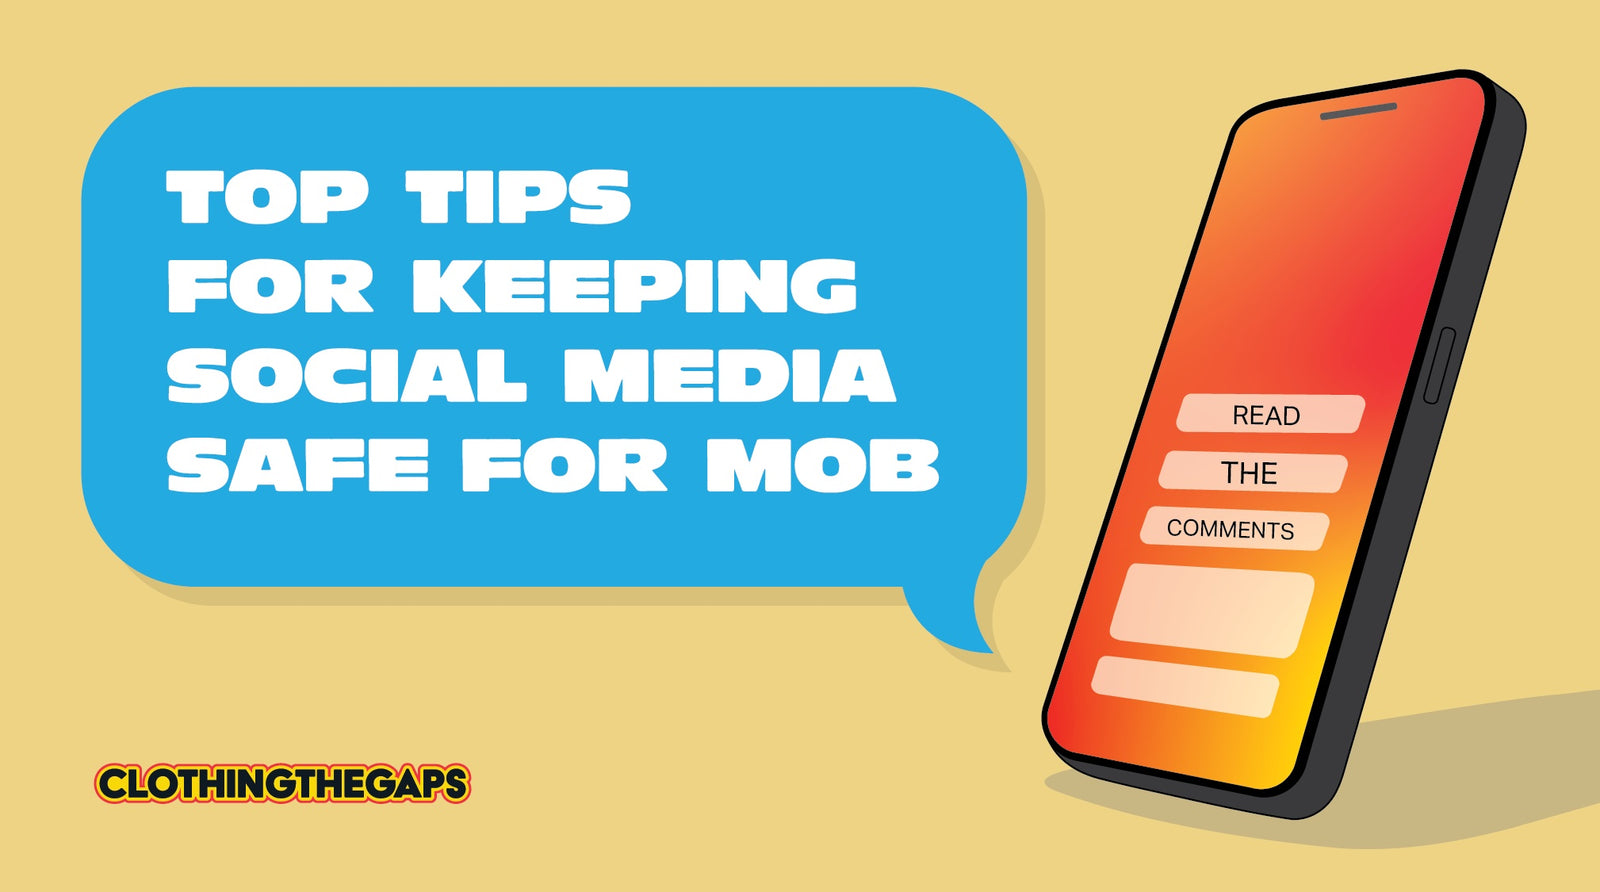 Read the Comments: Top Tips for keeping social media safe for Mob